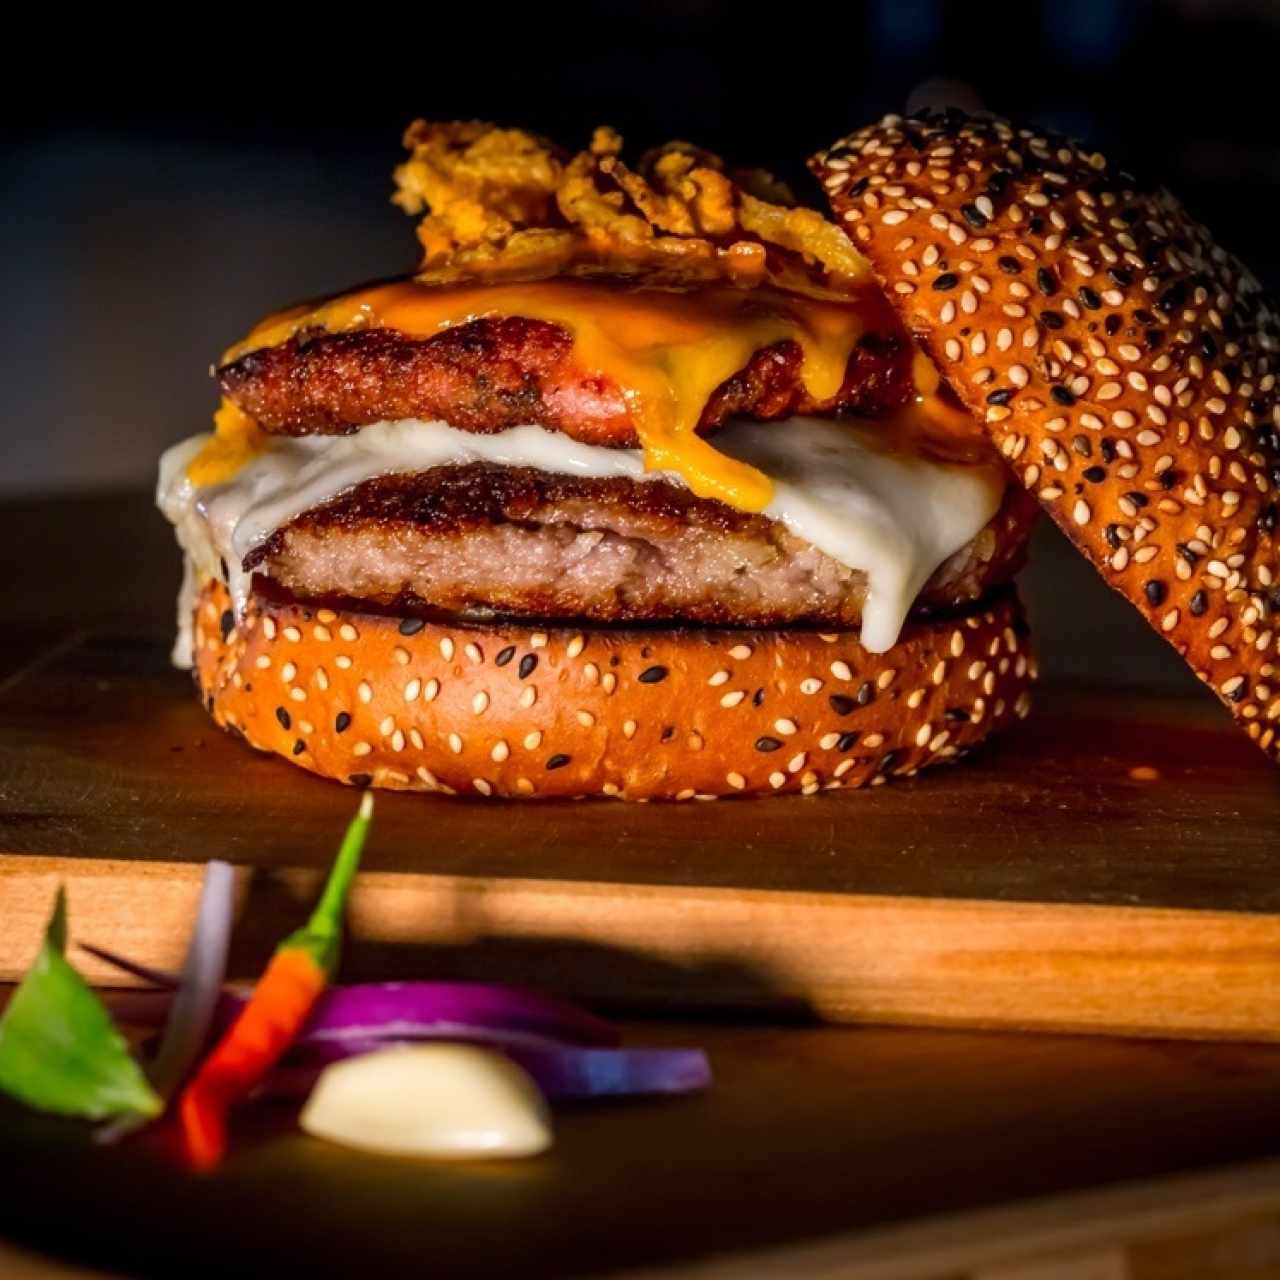 mauiwowie for burgerweek 18’ ONLY